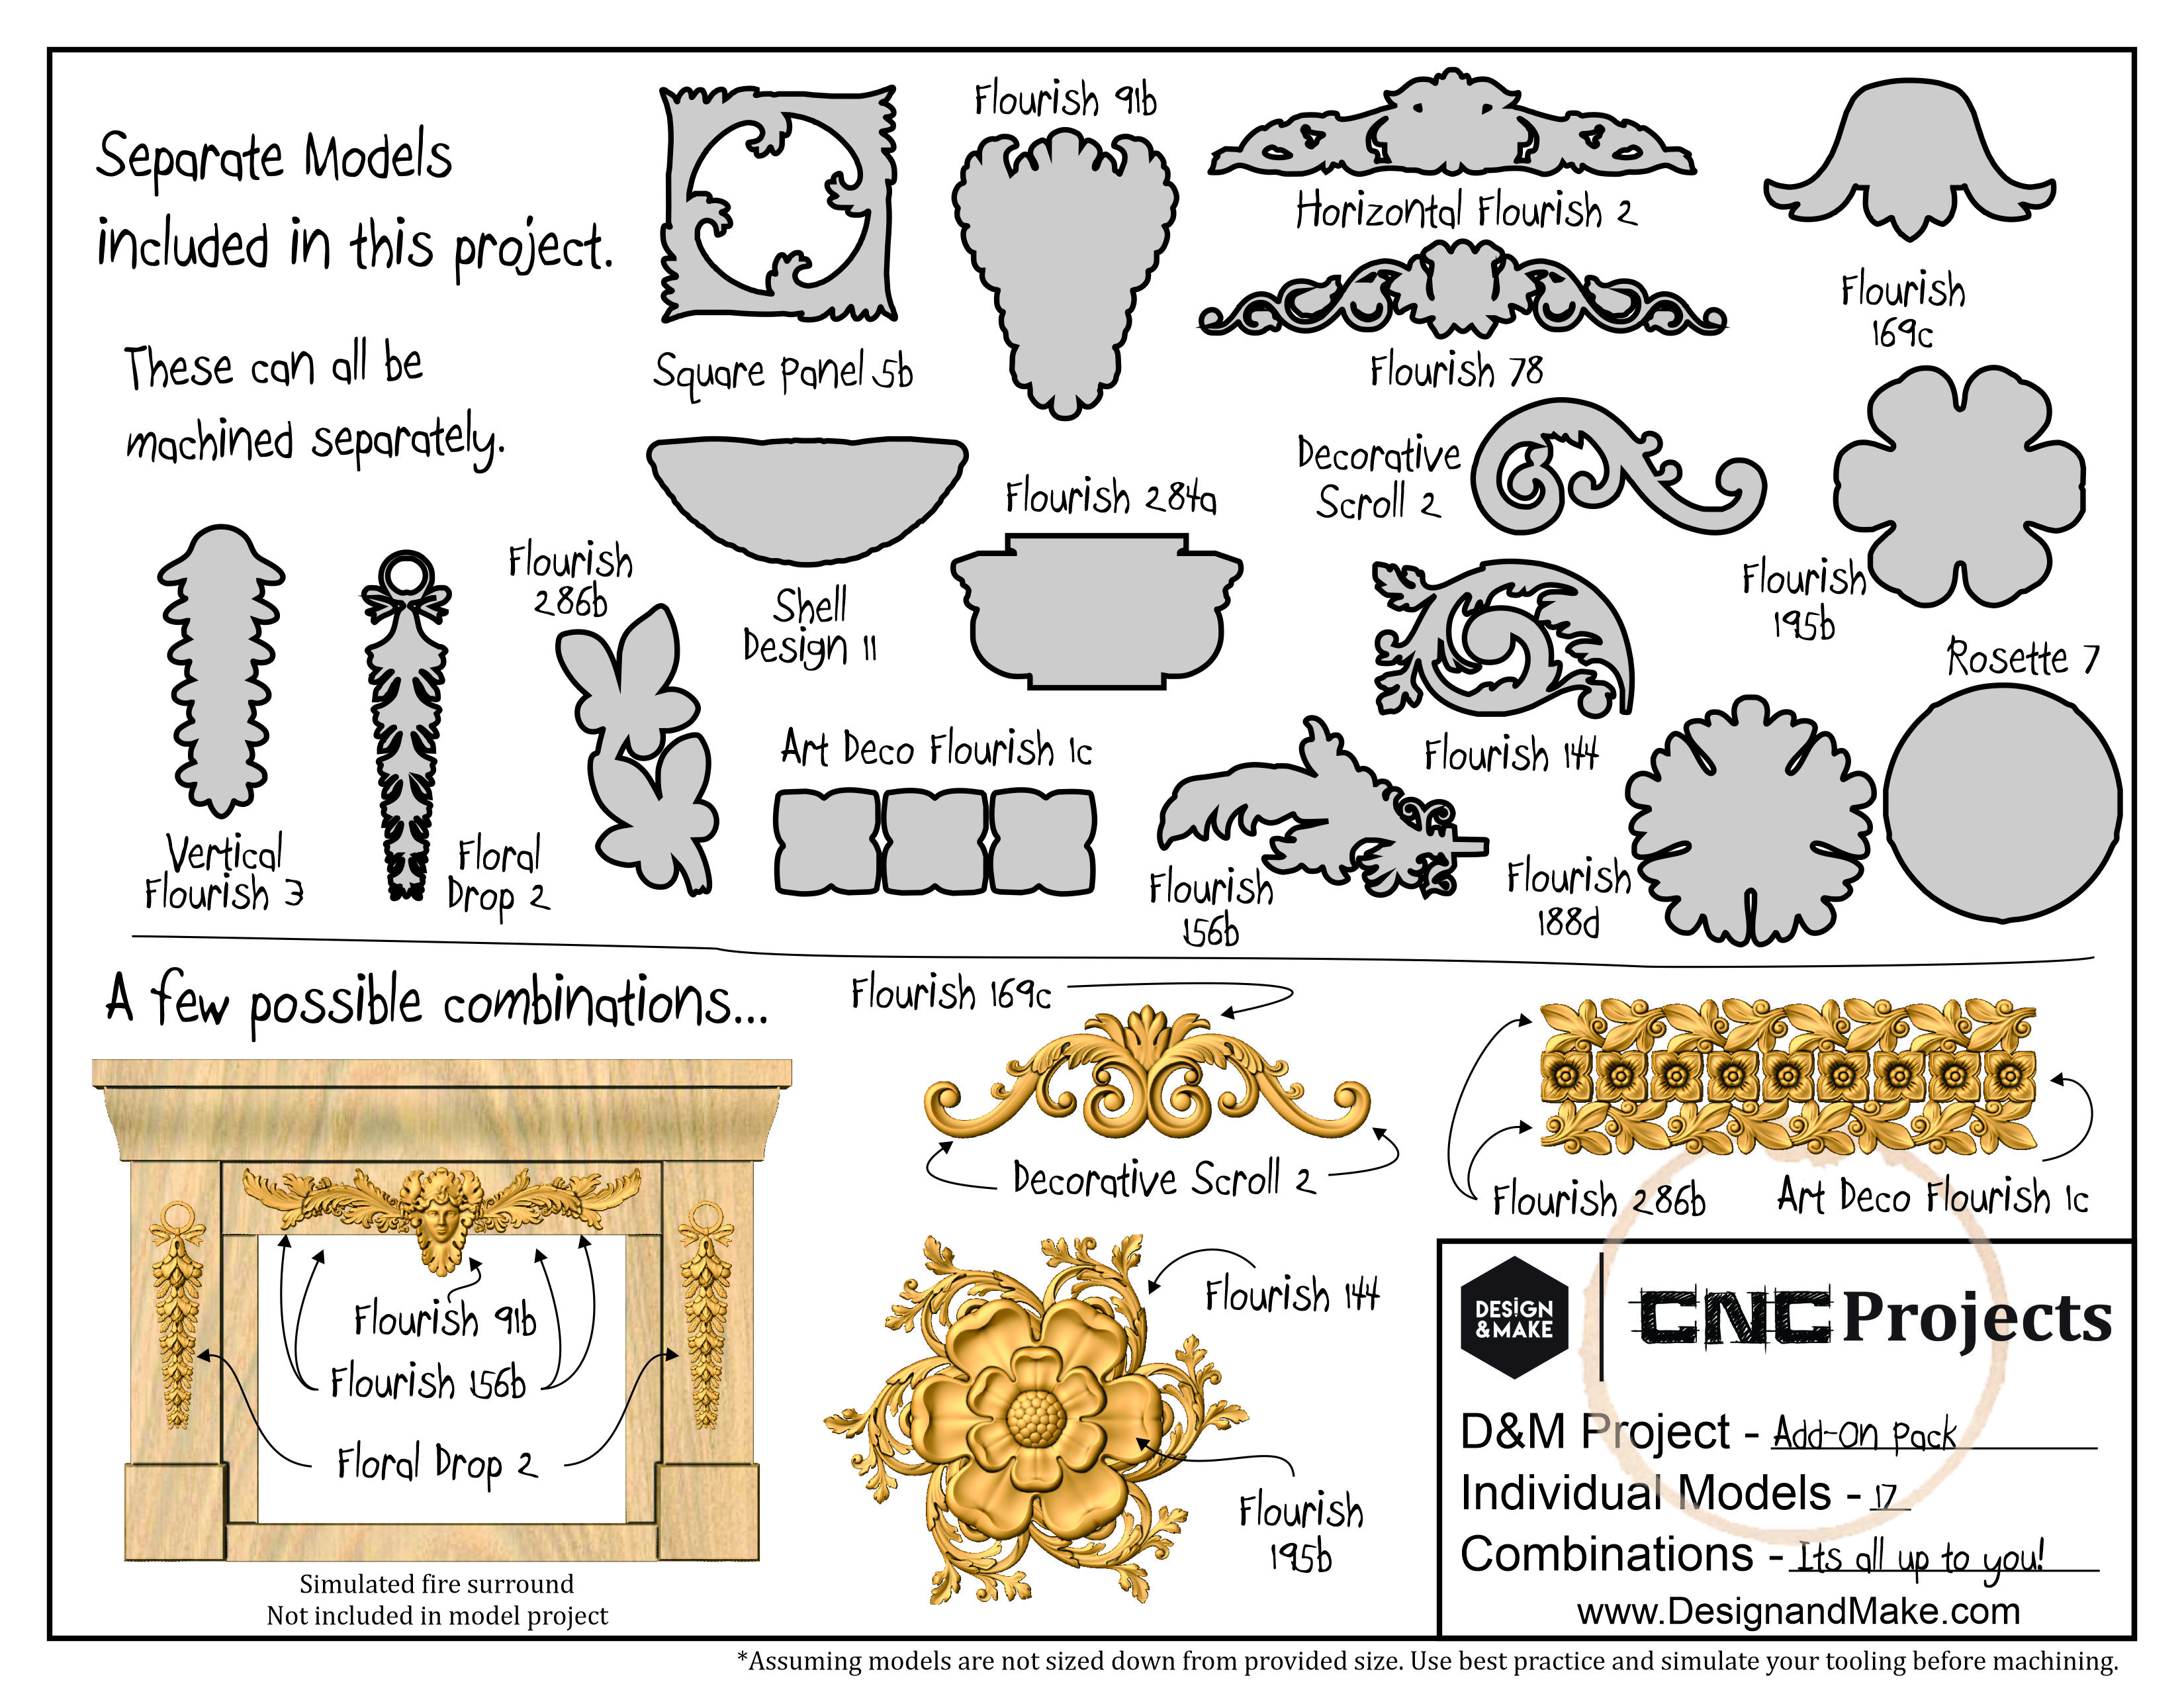 Architectural Elements - Add-on Pack - Project Sheet